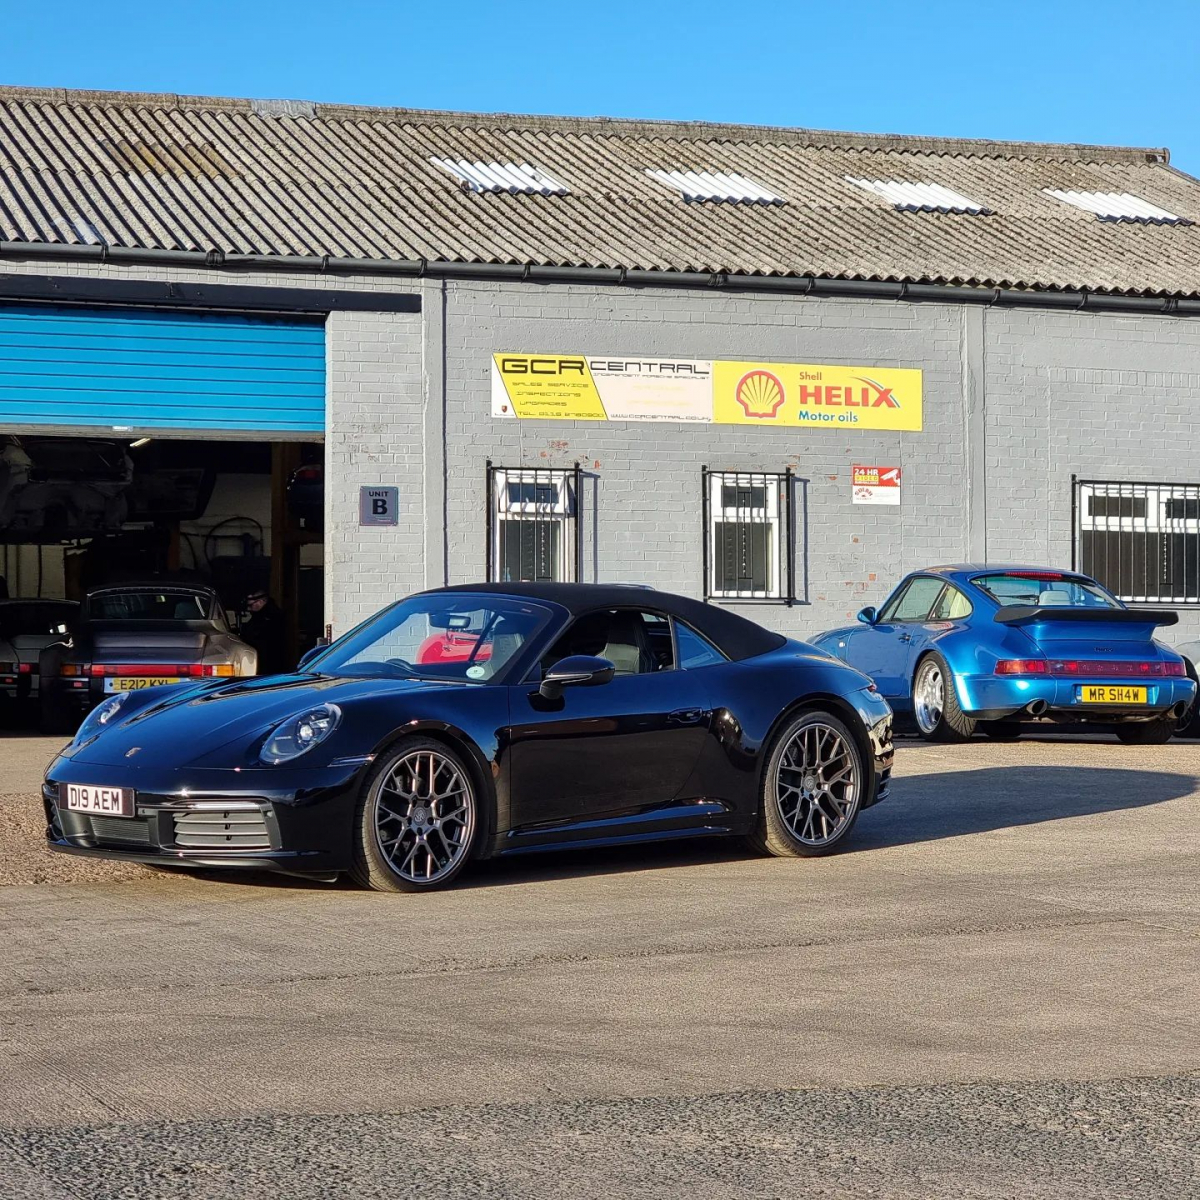 992 in for its first service today. Accommodating for all years of Porsche here at GCR!